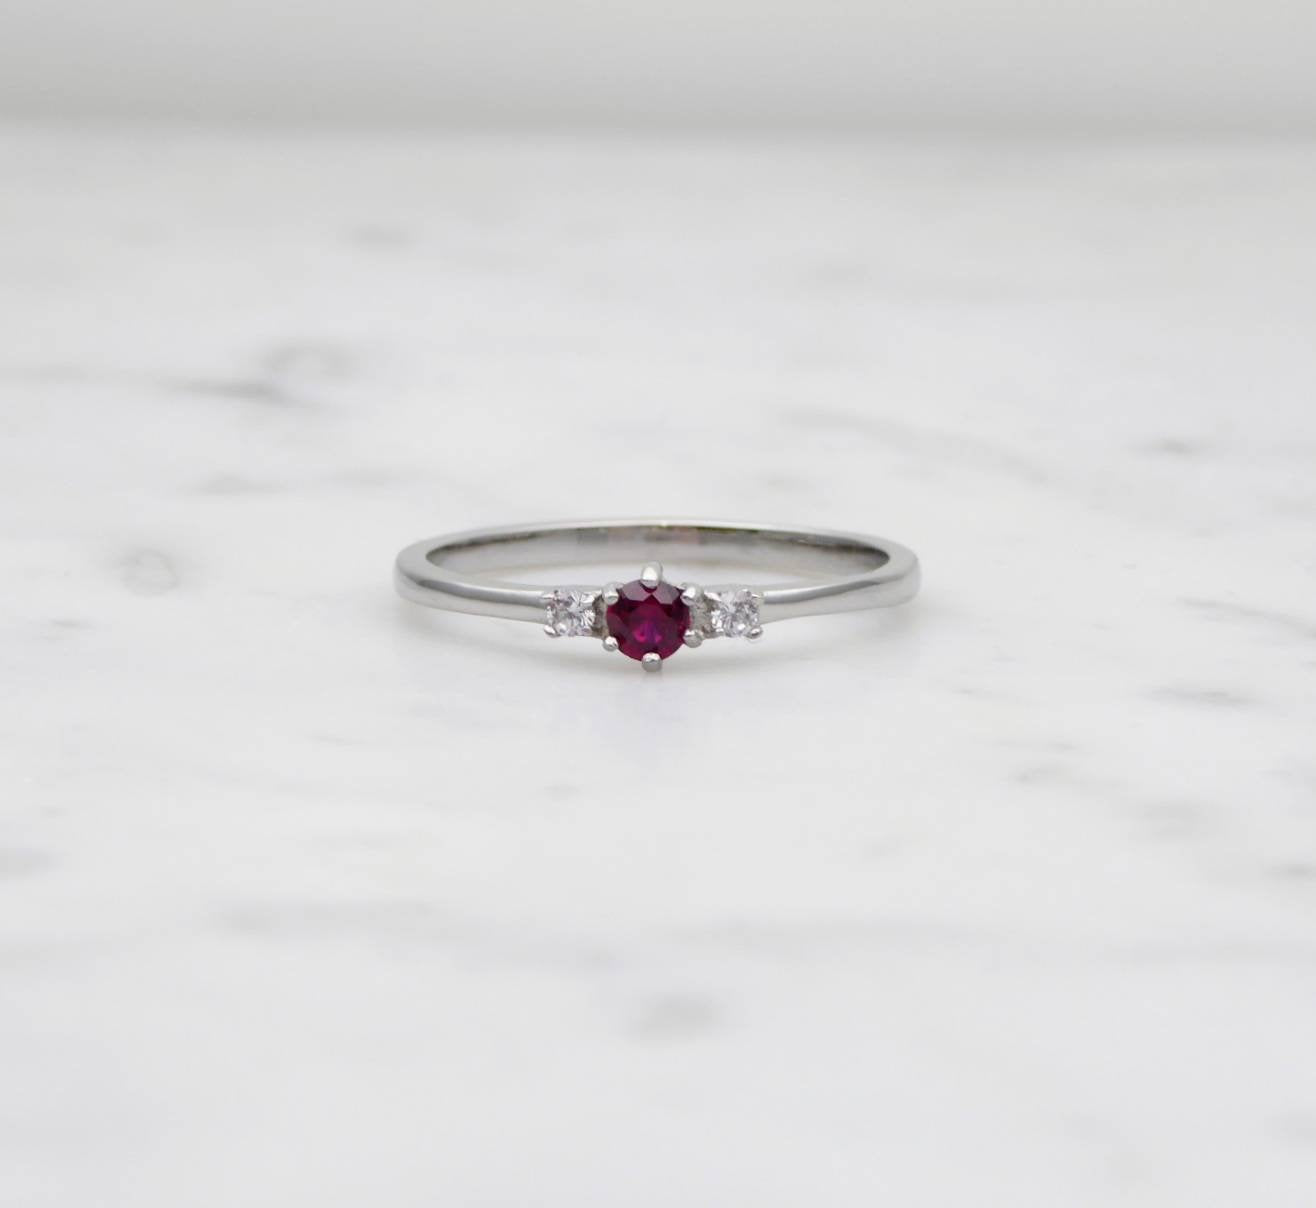 Natural Ruby and White Sapphire 3 stone Trilogy Ring in White Gold or Titanium  - engagement ring - handmade ring